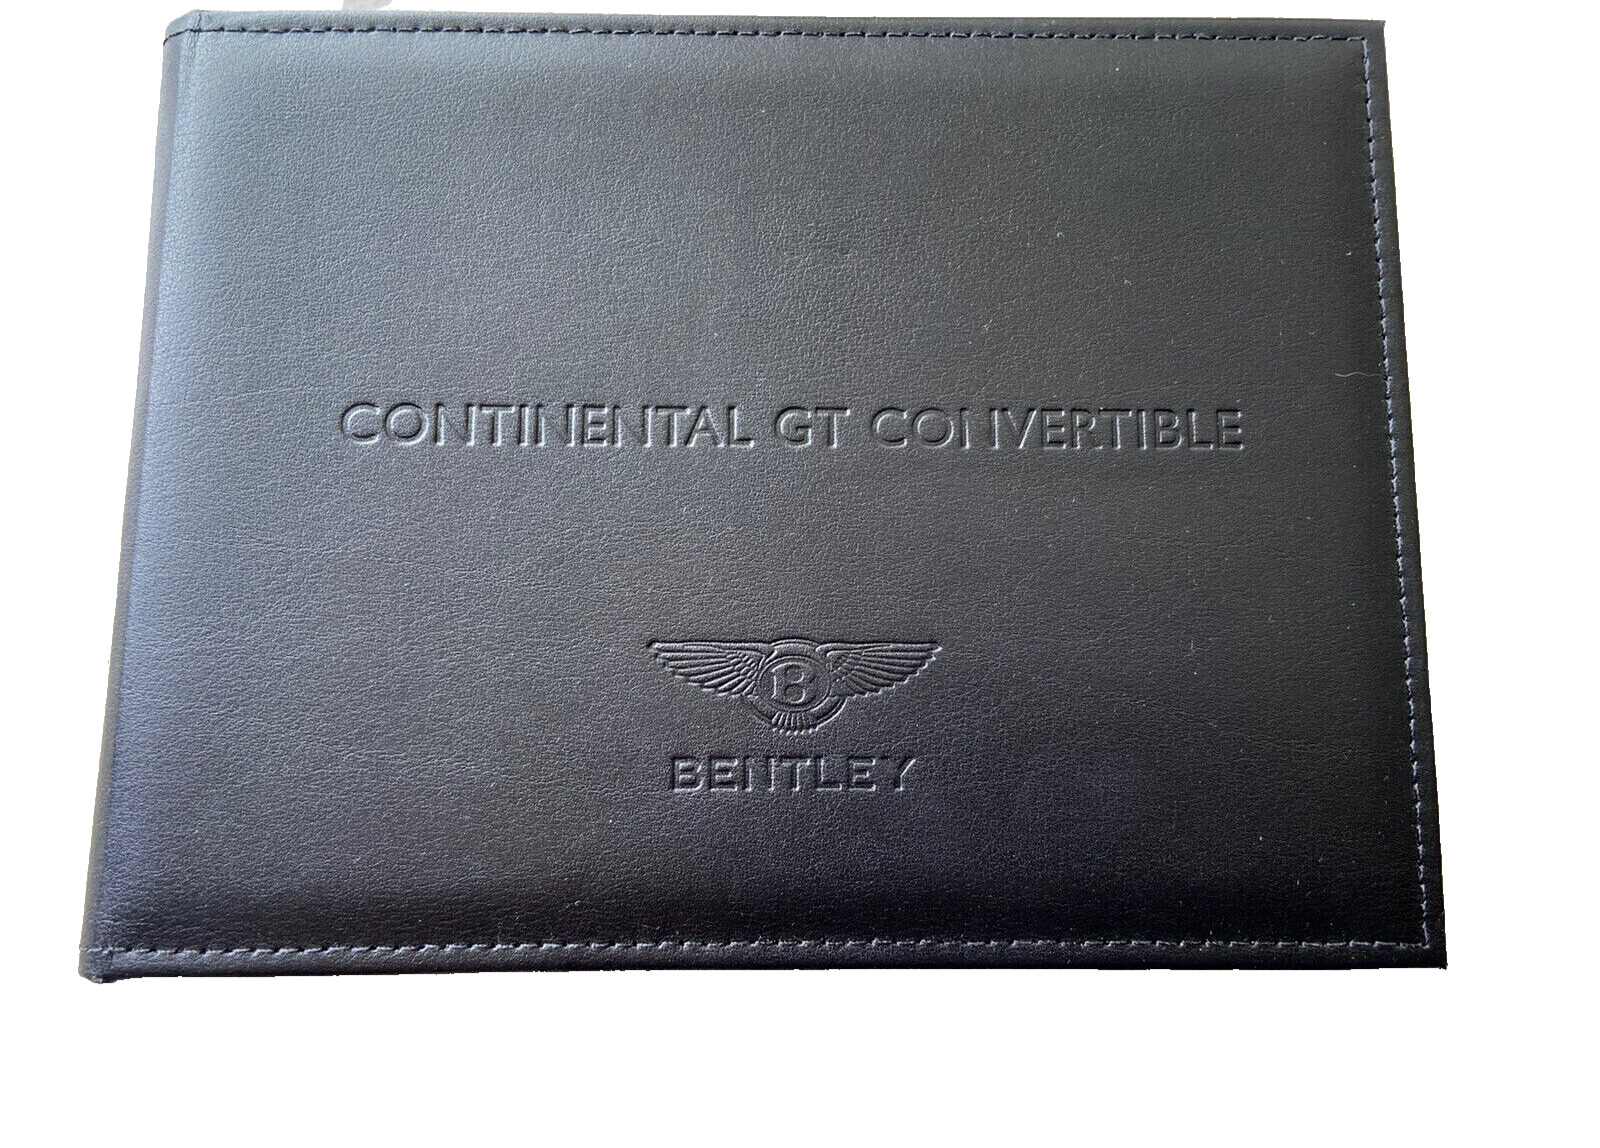 2017 BENTLEY CONTINENTAL GT CONVERTIBLE SPEED V8 W12 GTC OWNERS MANUAL